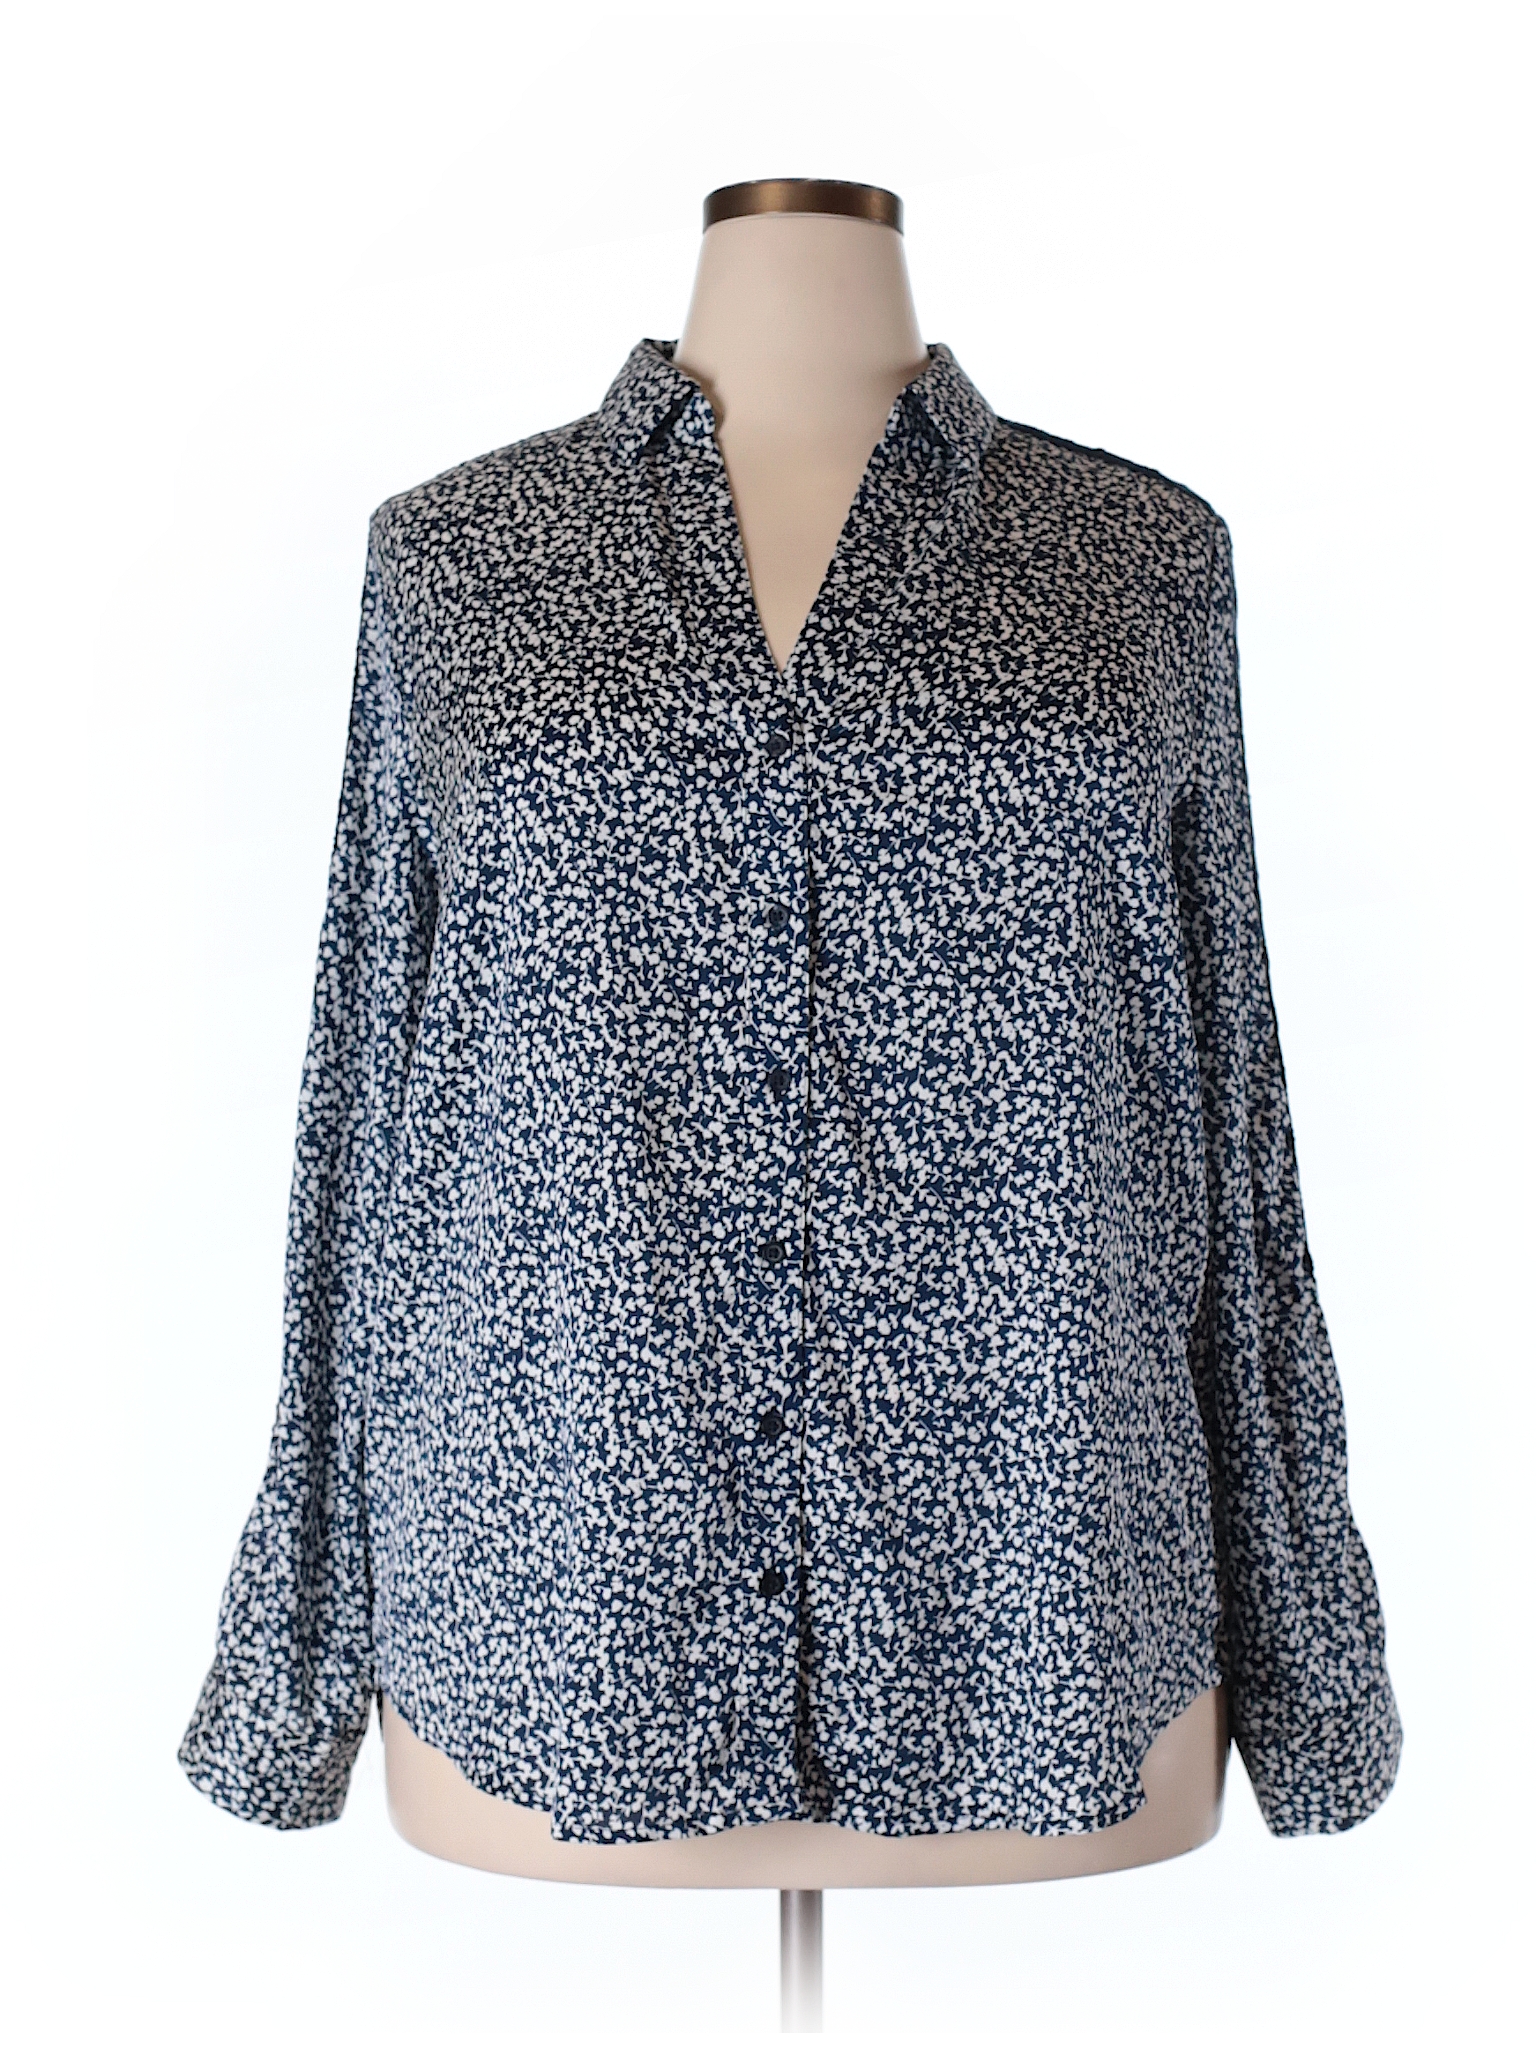 Ann Taylor Long Sleeve Blouse - 68% off only on thredUP